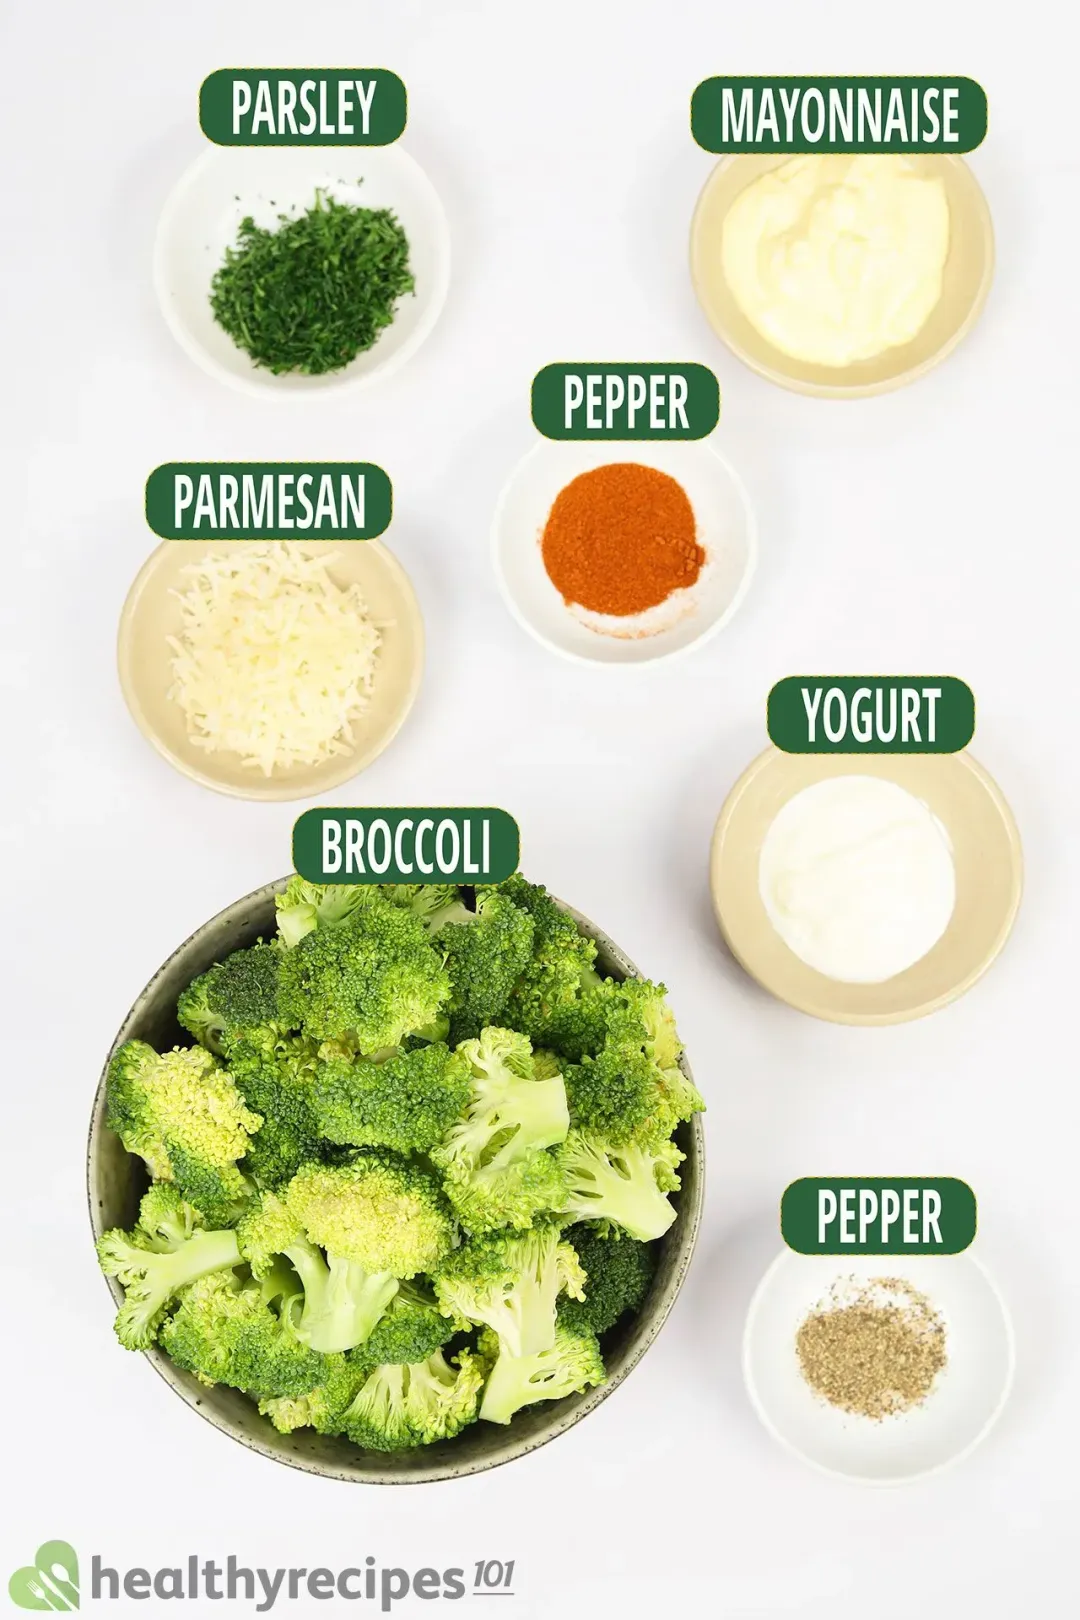 Ingredients for Steamed Broccoli